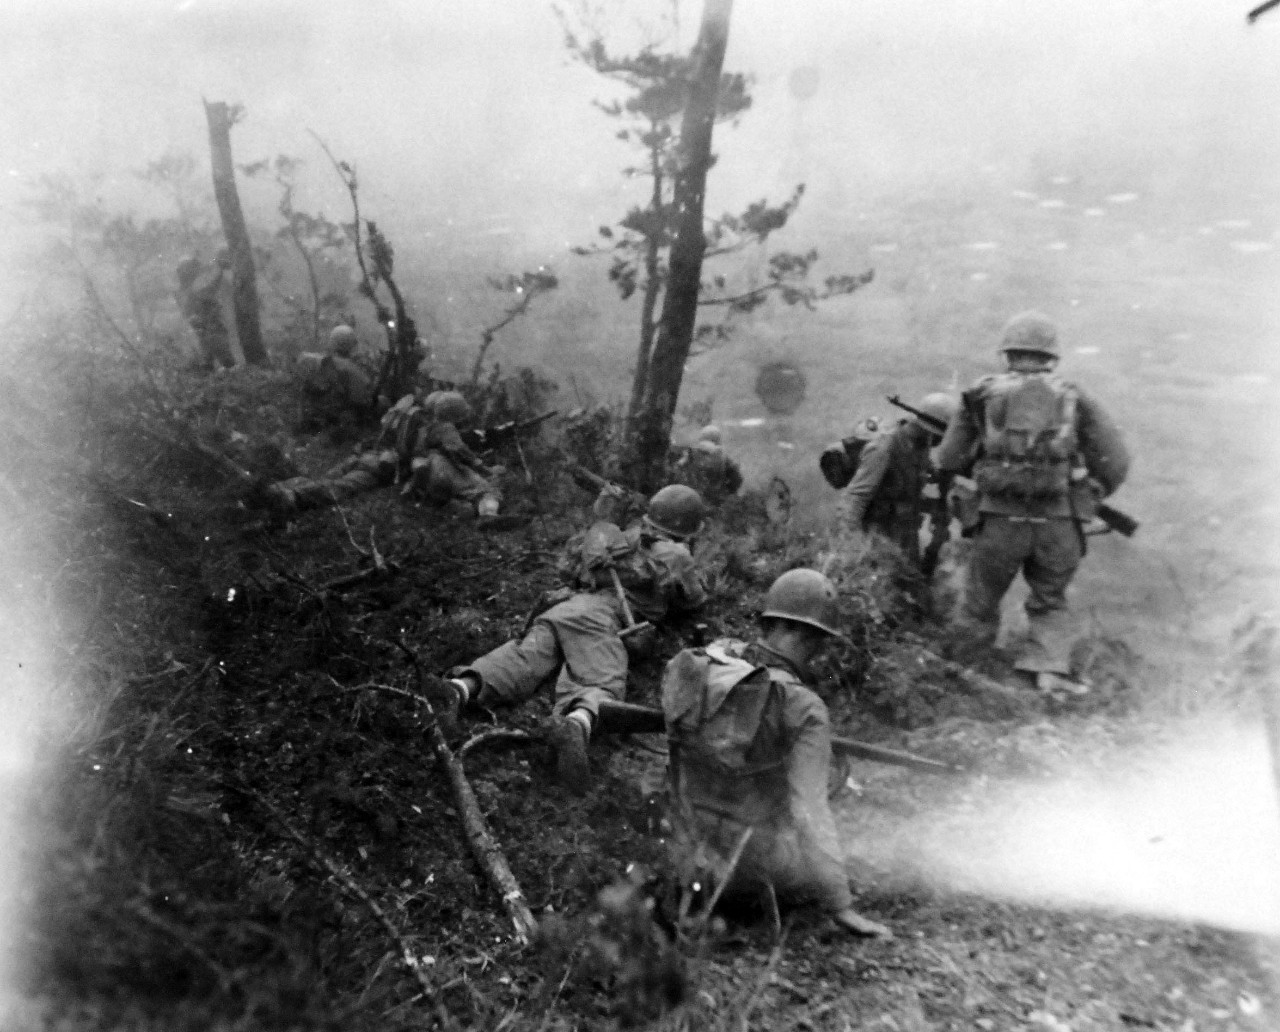 127-GW-518-122843:  Okinawa Campaign, April-June 1945.     U.S. Marines get the word to go down the side of the hill, here under supporting light machine gun fire.  They then charge down the side of the hill at the Japanese, Okinawa.   Photographed by Henderson, 1 June 1945.  Official U.S. Navy Photograph, now in the collections of the National Archives.   (2014/6/25).